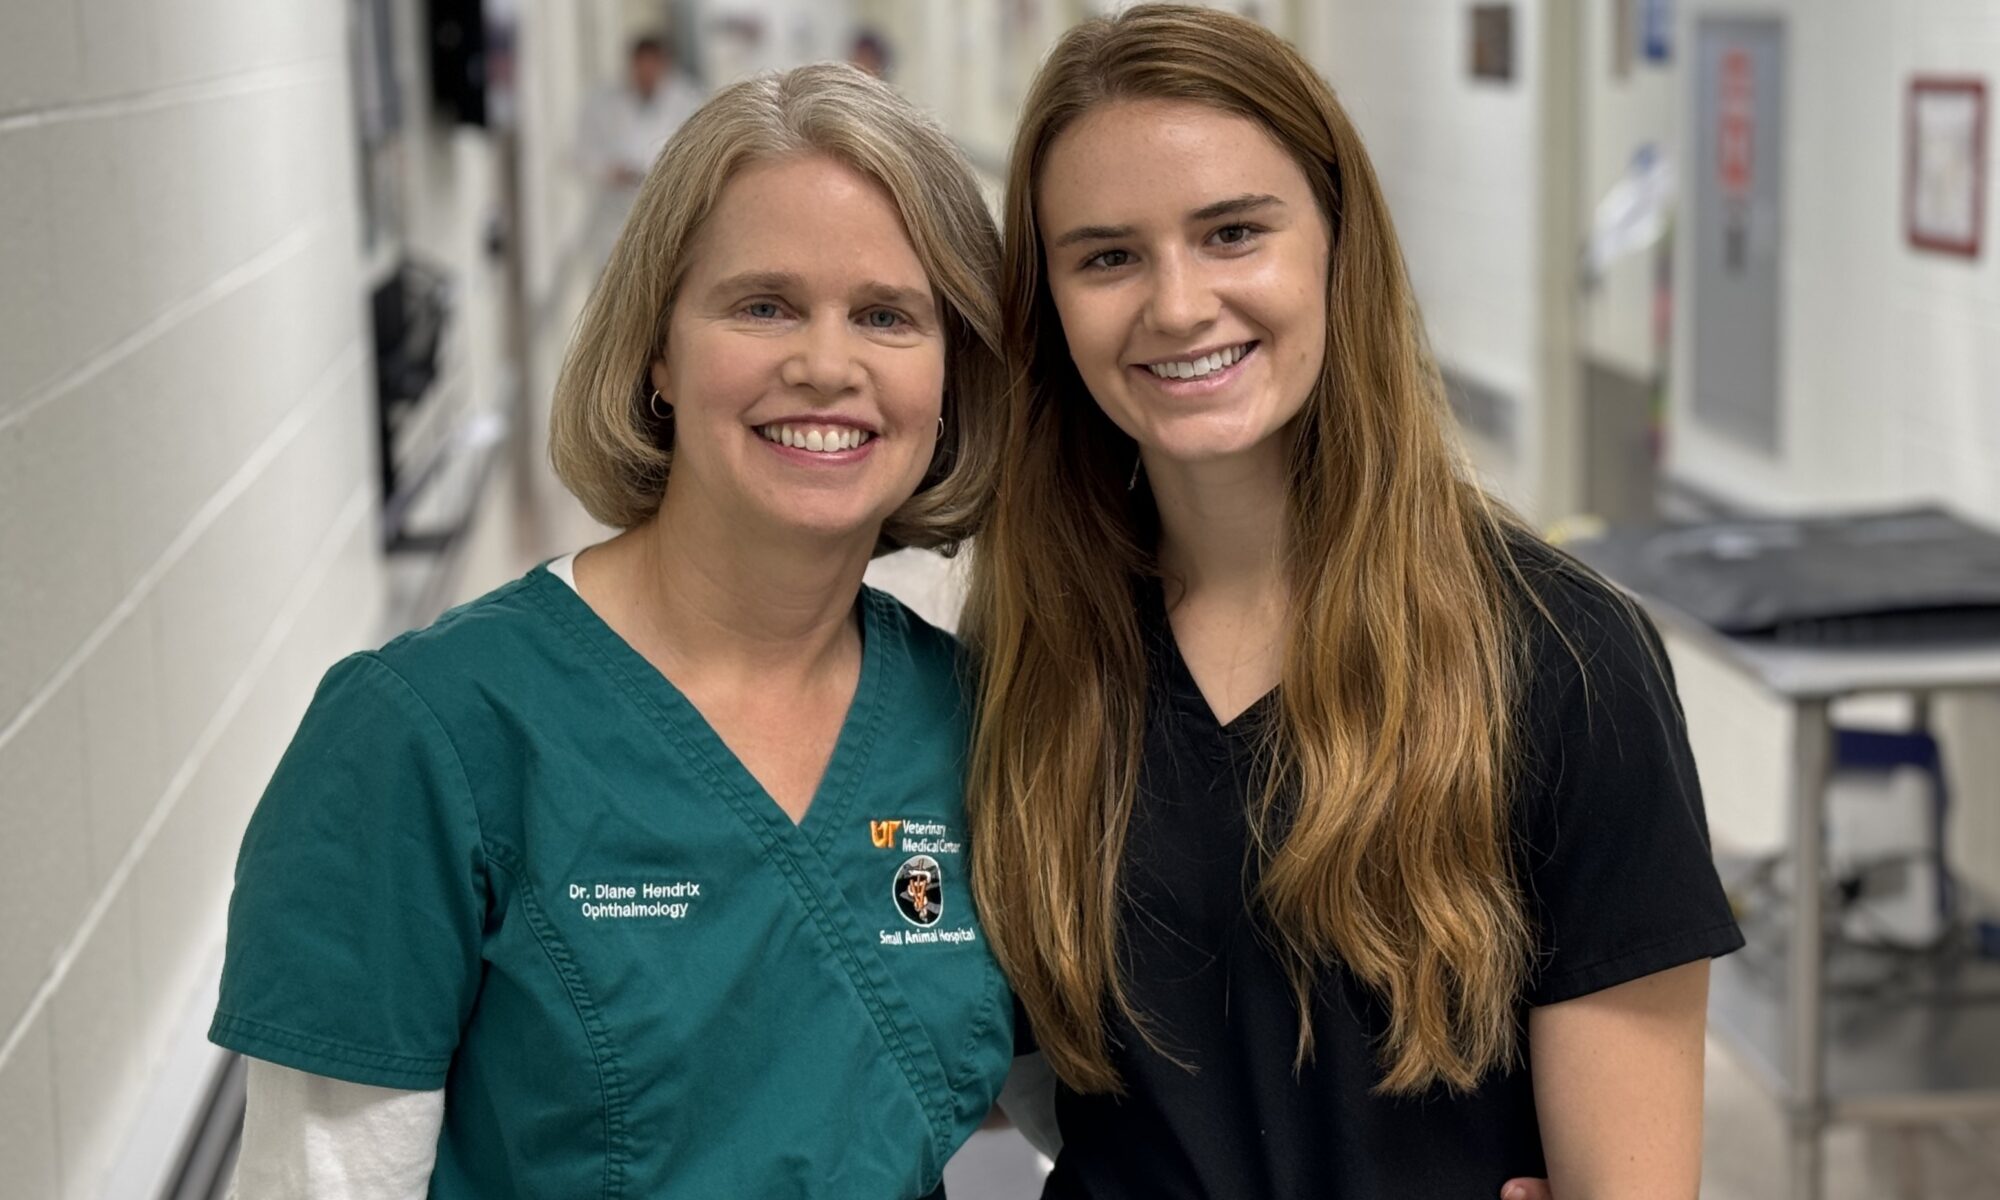 Dr. Diane Hendrix in screen scrubs stands next to her daughter, Emma, who is wearing a black scrub top. They are in a veterinary hospital hallway.